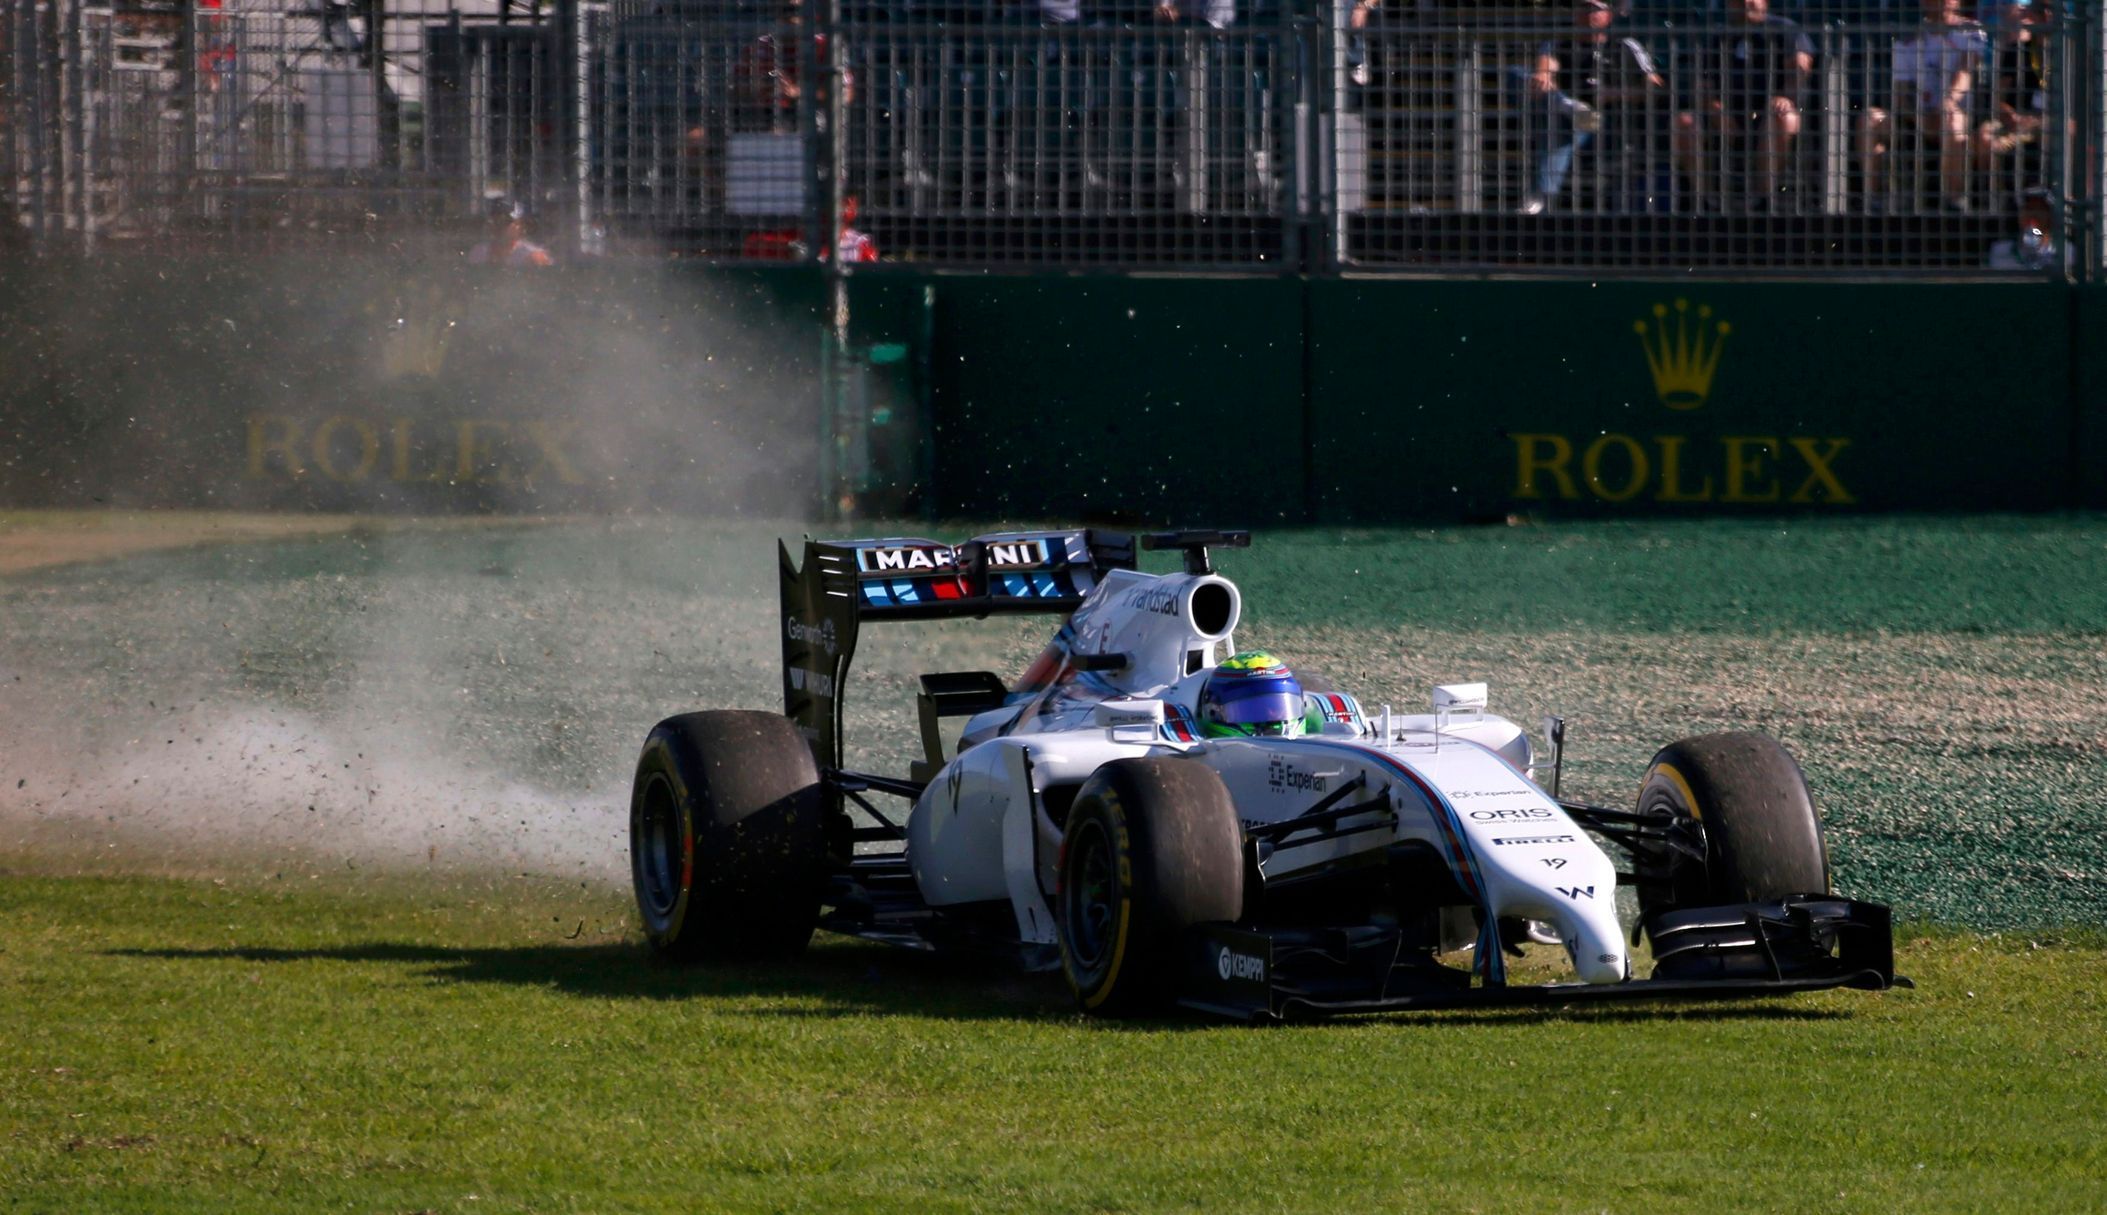 Williams Formula One driver Massa of Brazil drives into the gravel during the second practice session of the Australian F1 Grand Prix in Melbourne